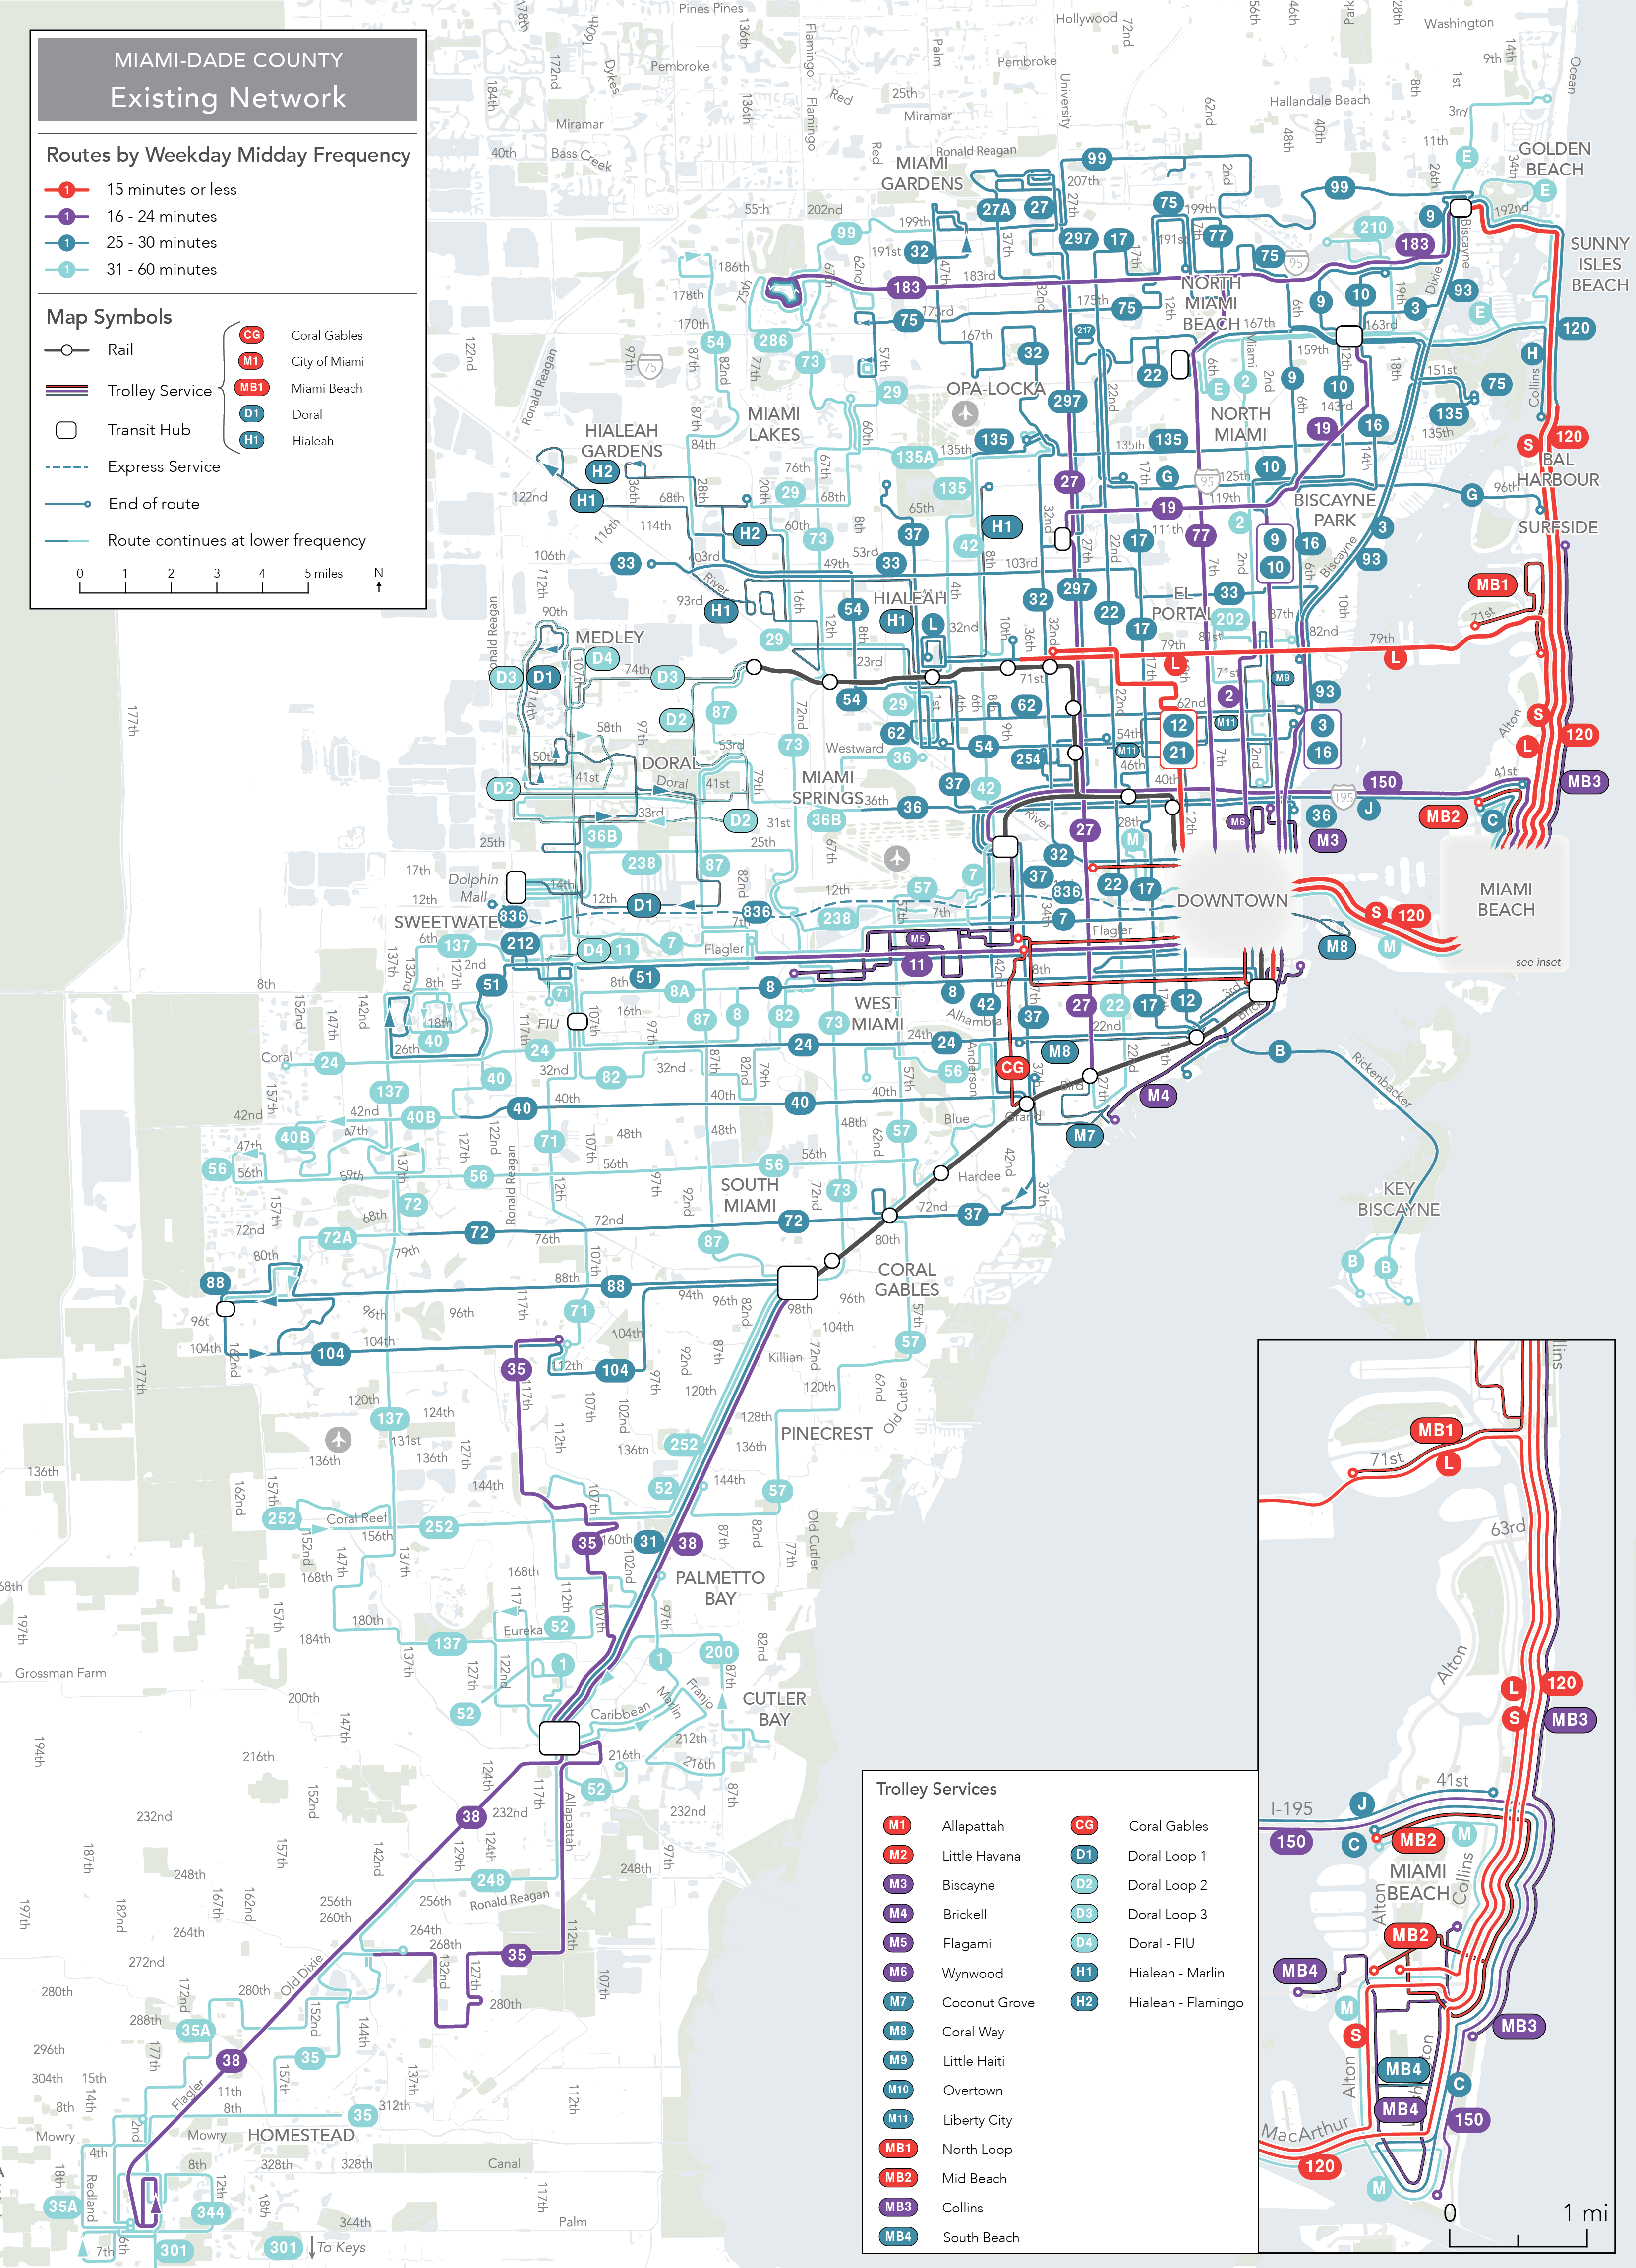 miami: a new network with a resilience plan — human transit